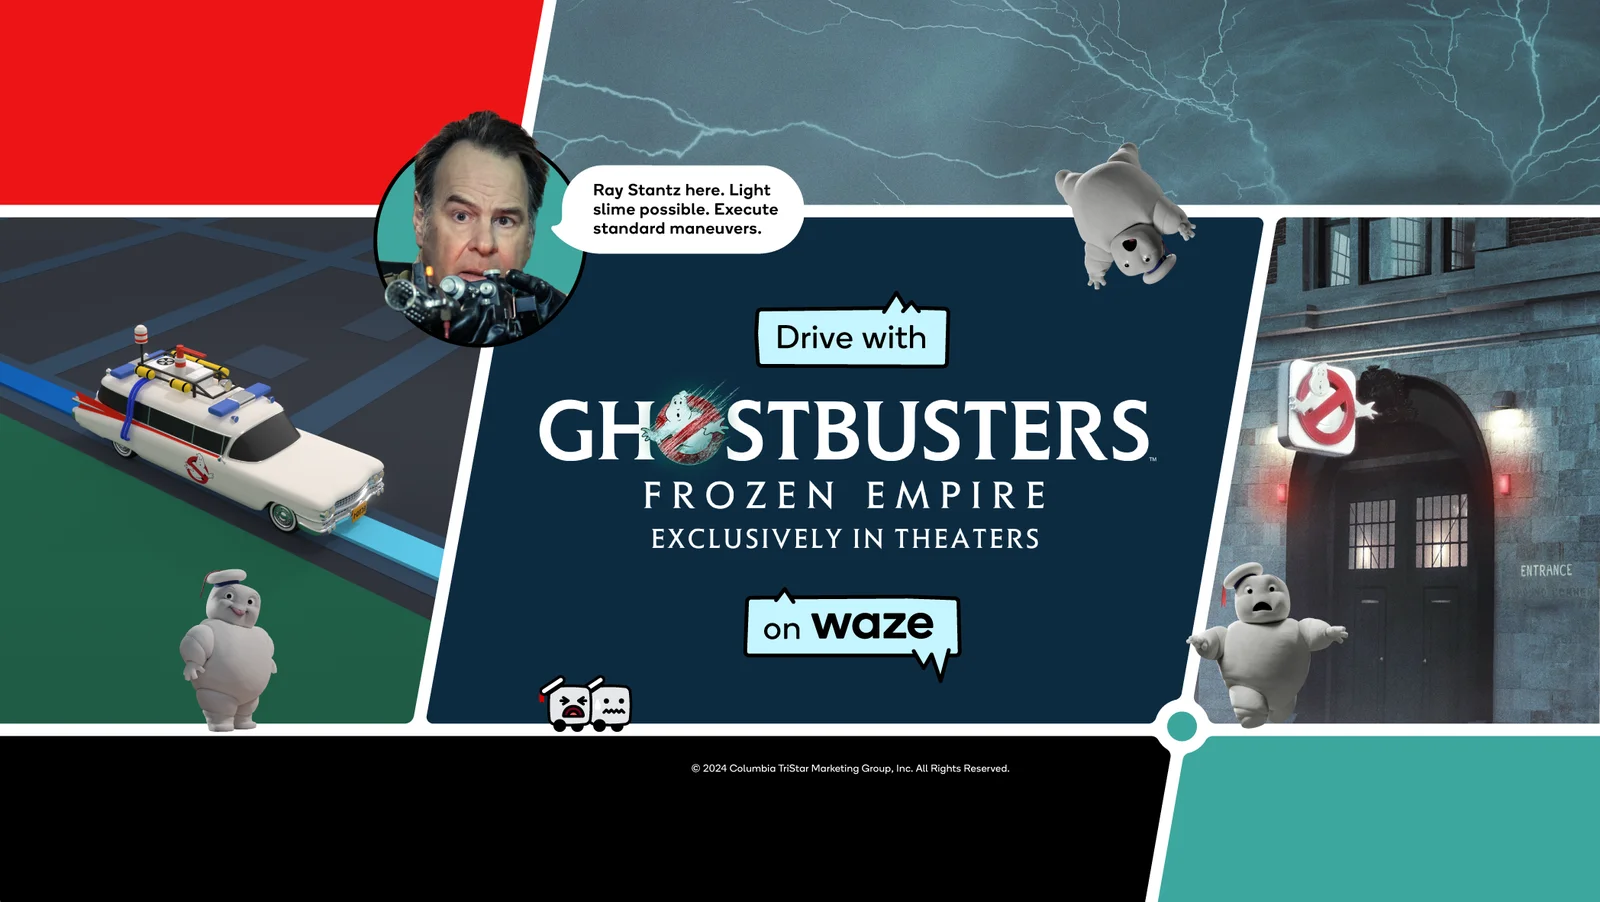 A Ghostbusters promotional image for Google Waze